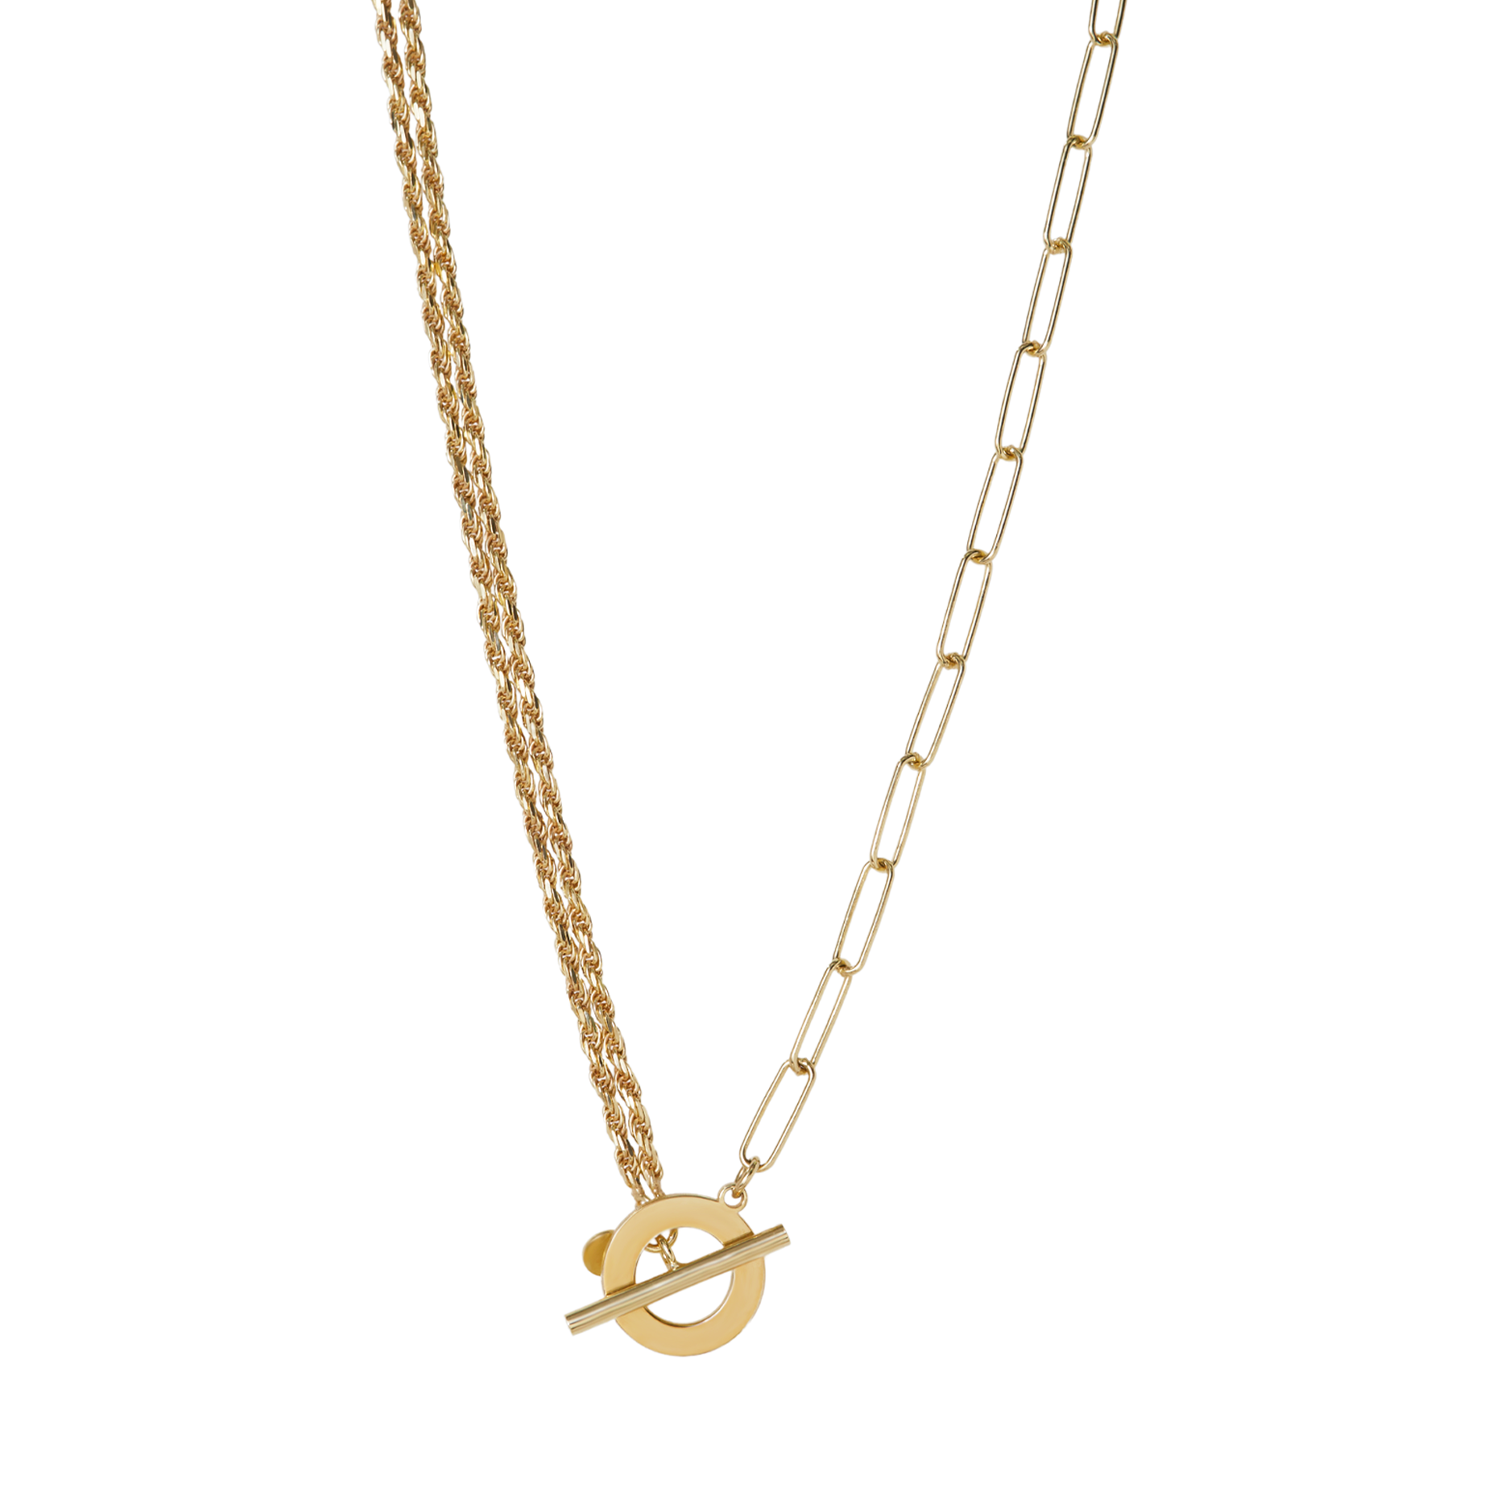 THE DOUBLE ROPE CLIP CHAIN TOGGLE NECKLACE